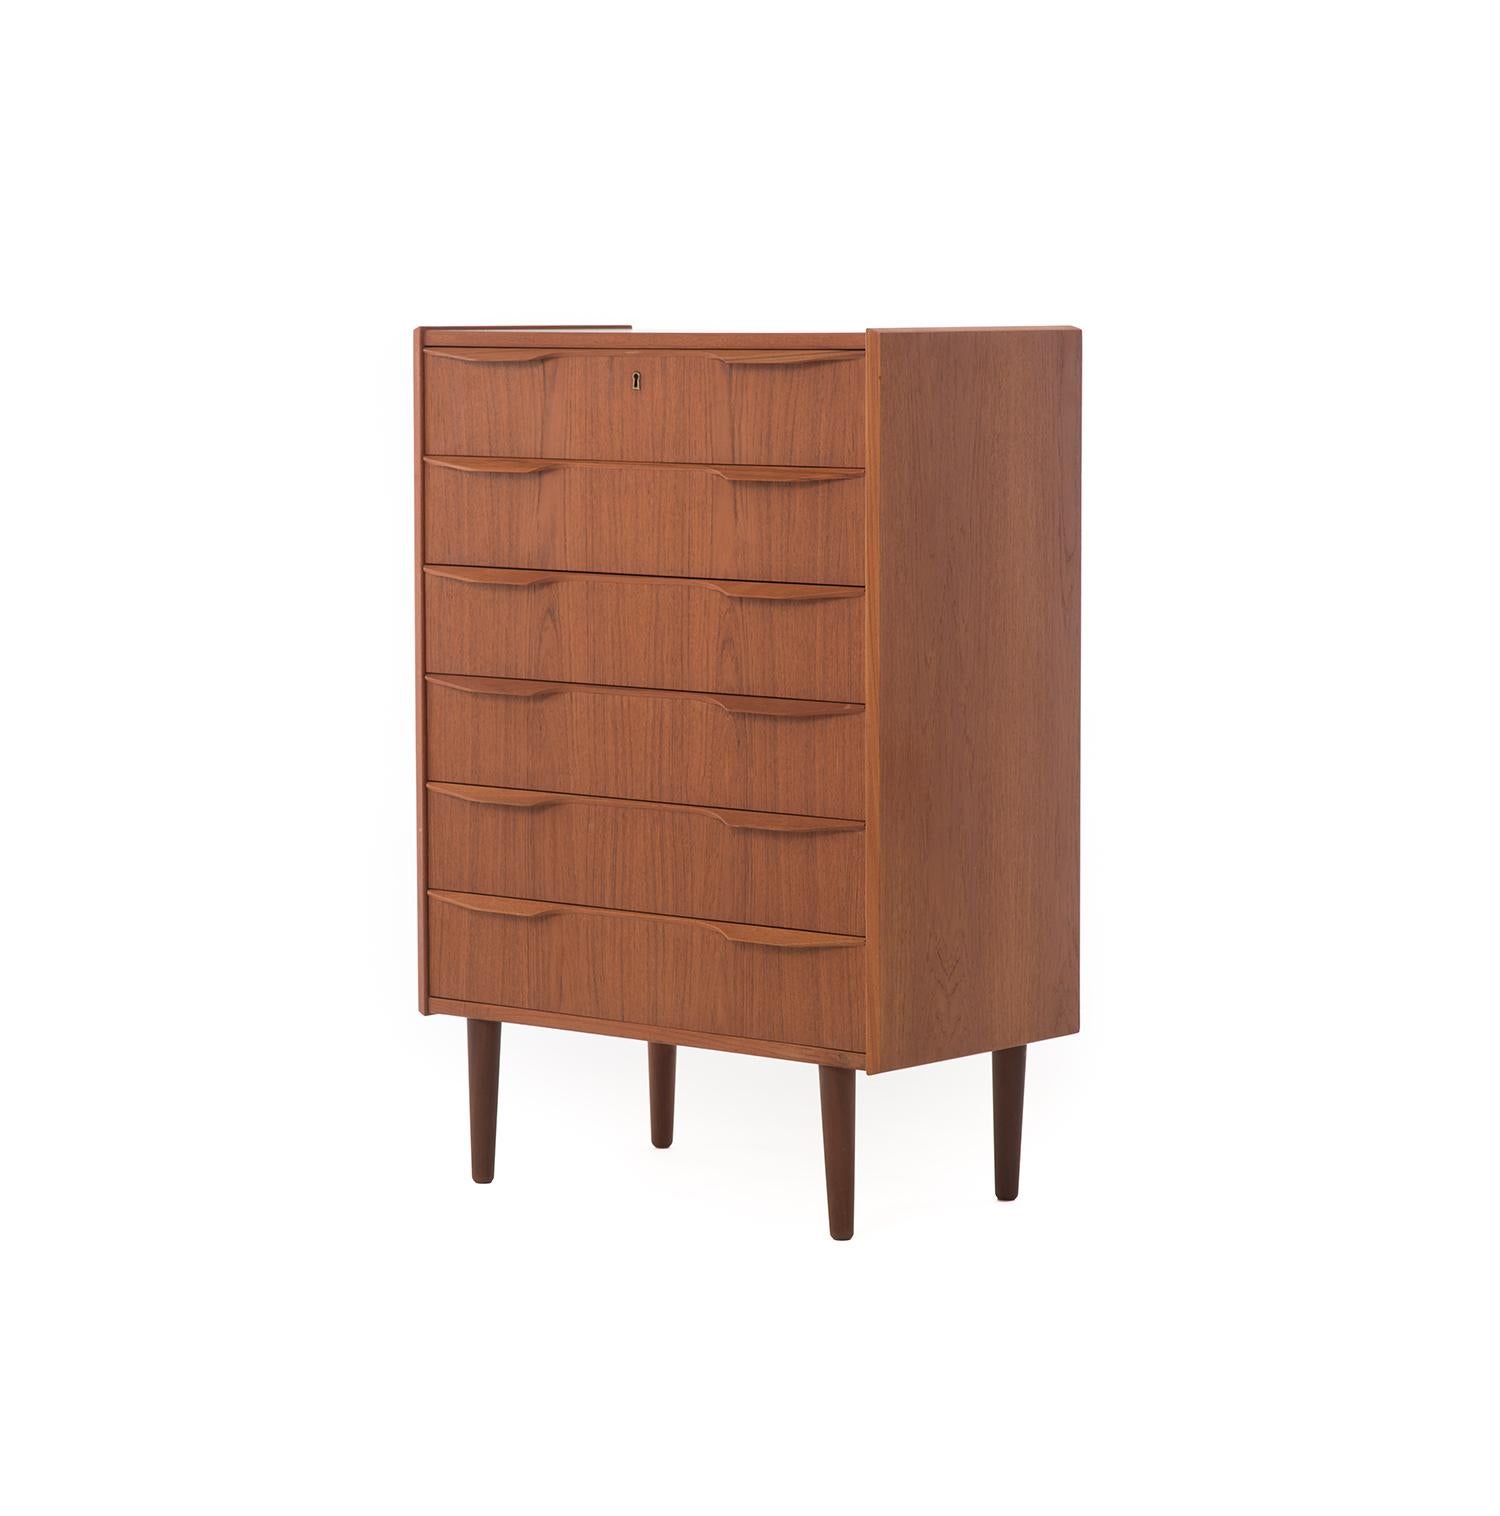 A delicate wood grain and winged pulls set this restored Danish teak dresser apart from all other midcentury highboy dressers. Six drawers, equal in size, provide ample storage for all your daily necessities; folded and otherwise. Measuring at 31 W